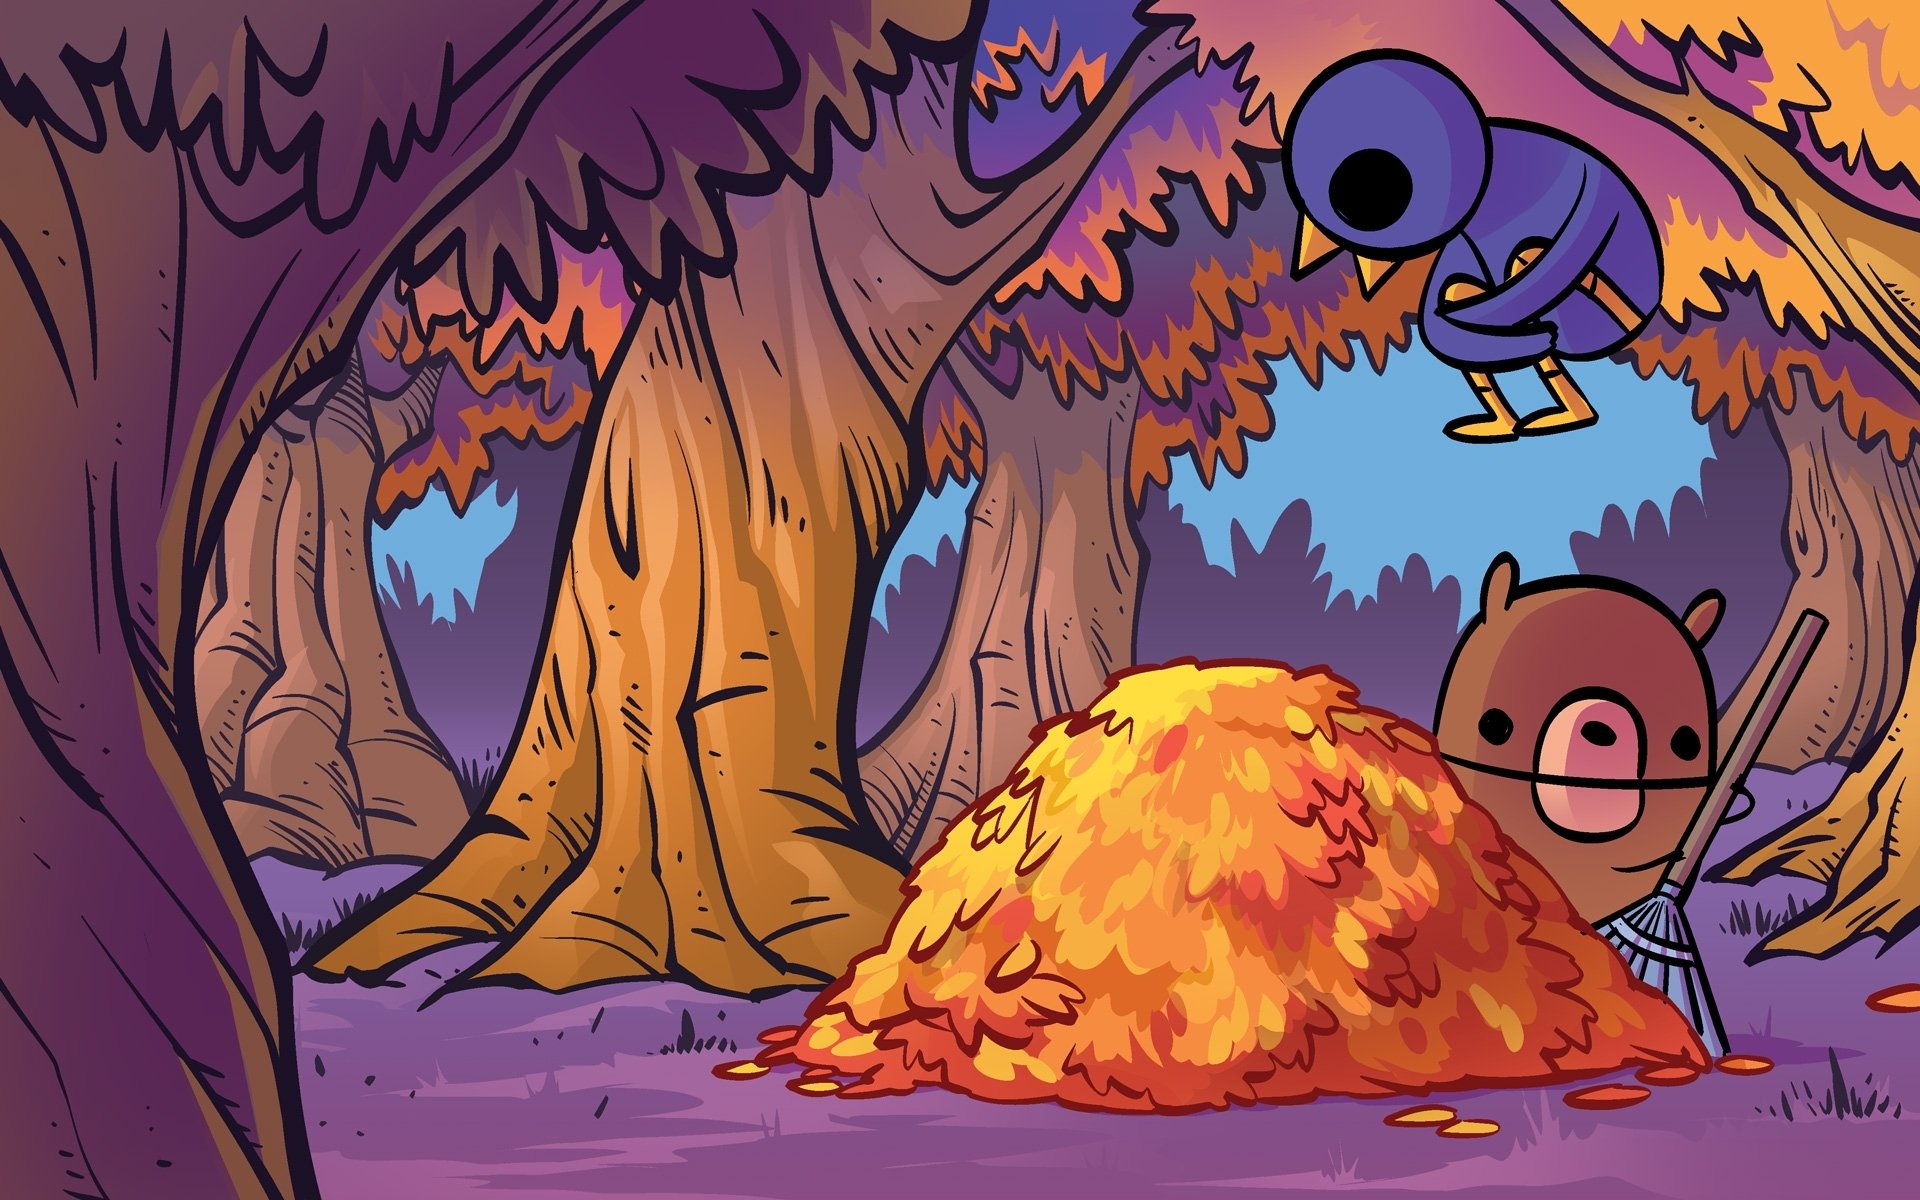 Art, Nedroid, Cute, Cartoon, Bears, Birds, Trees, Forest, Woods, Leaves, Nature, Autumn, Fall Wallpaper HD / Desktop and Mobile Background